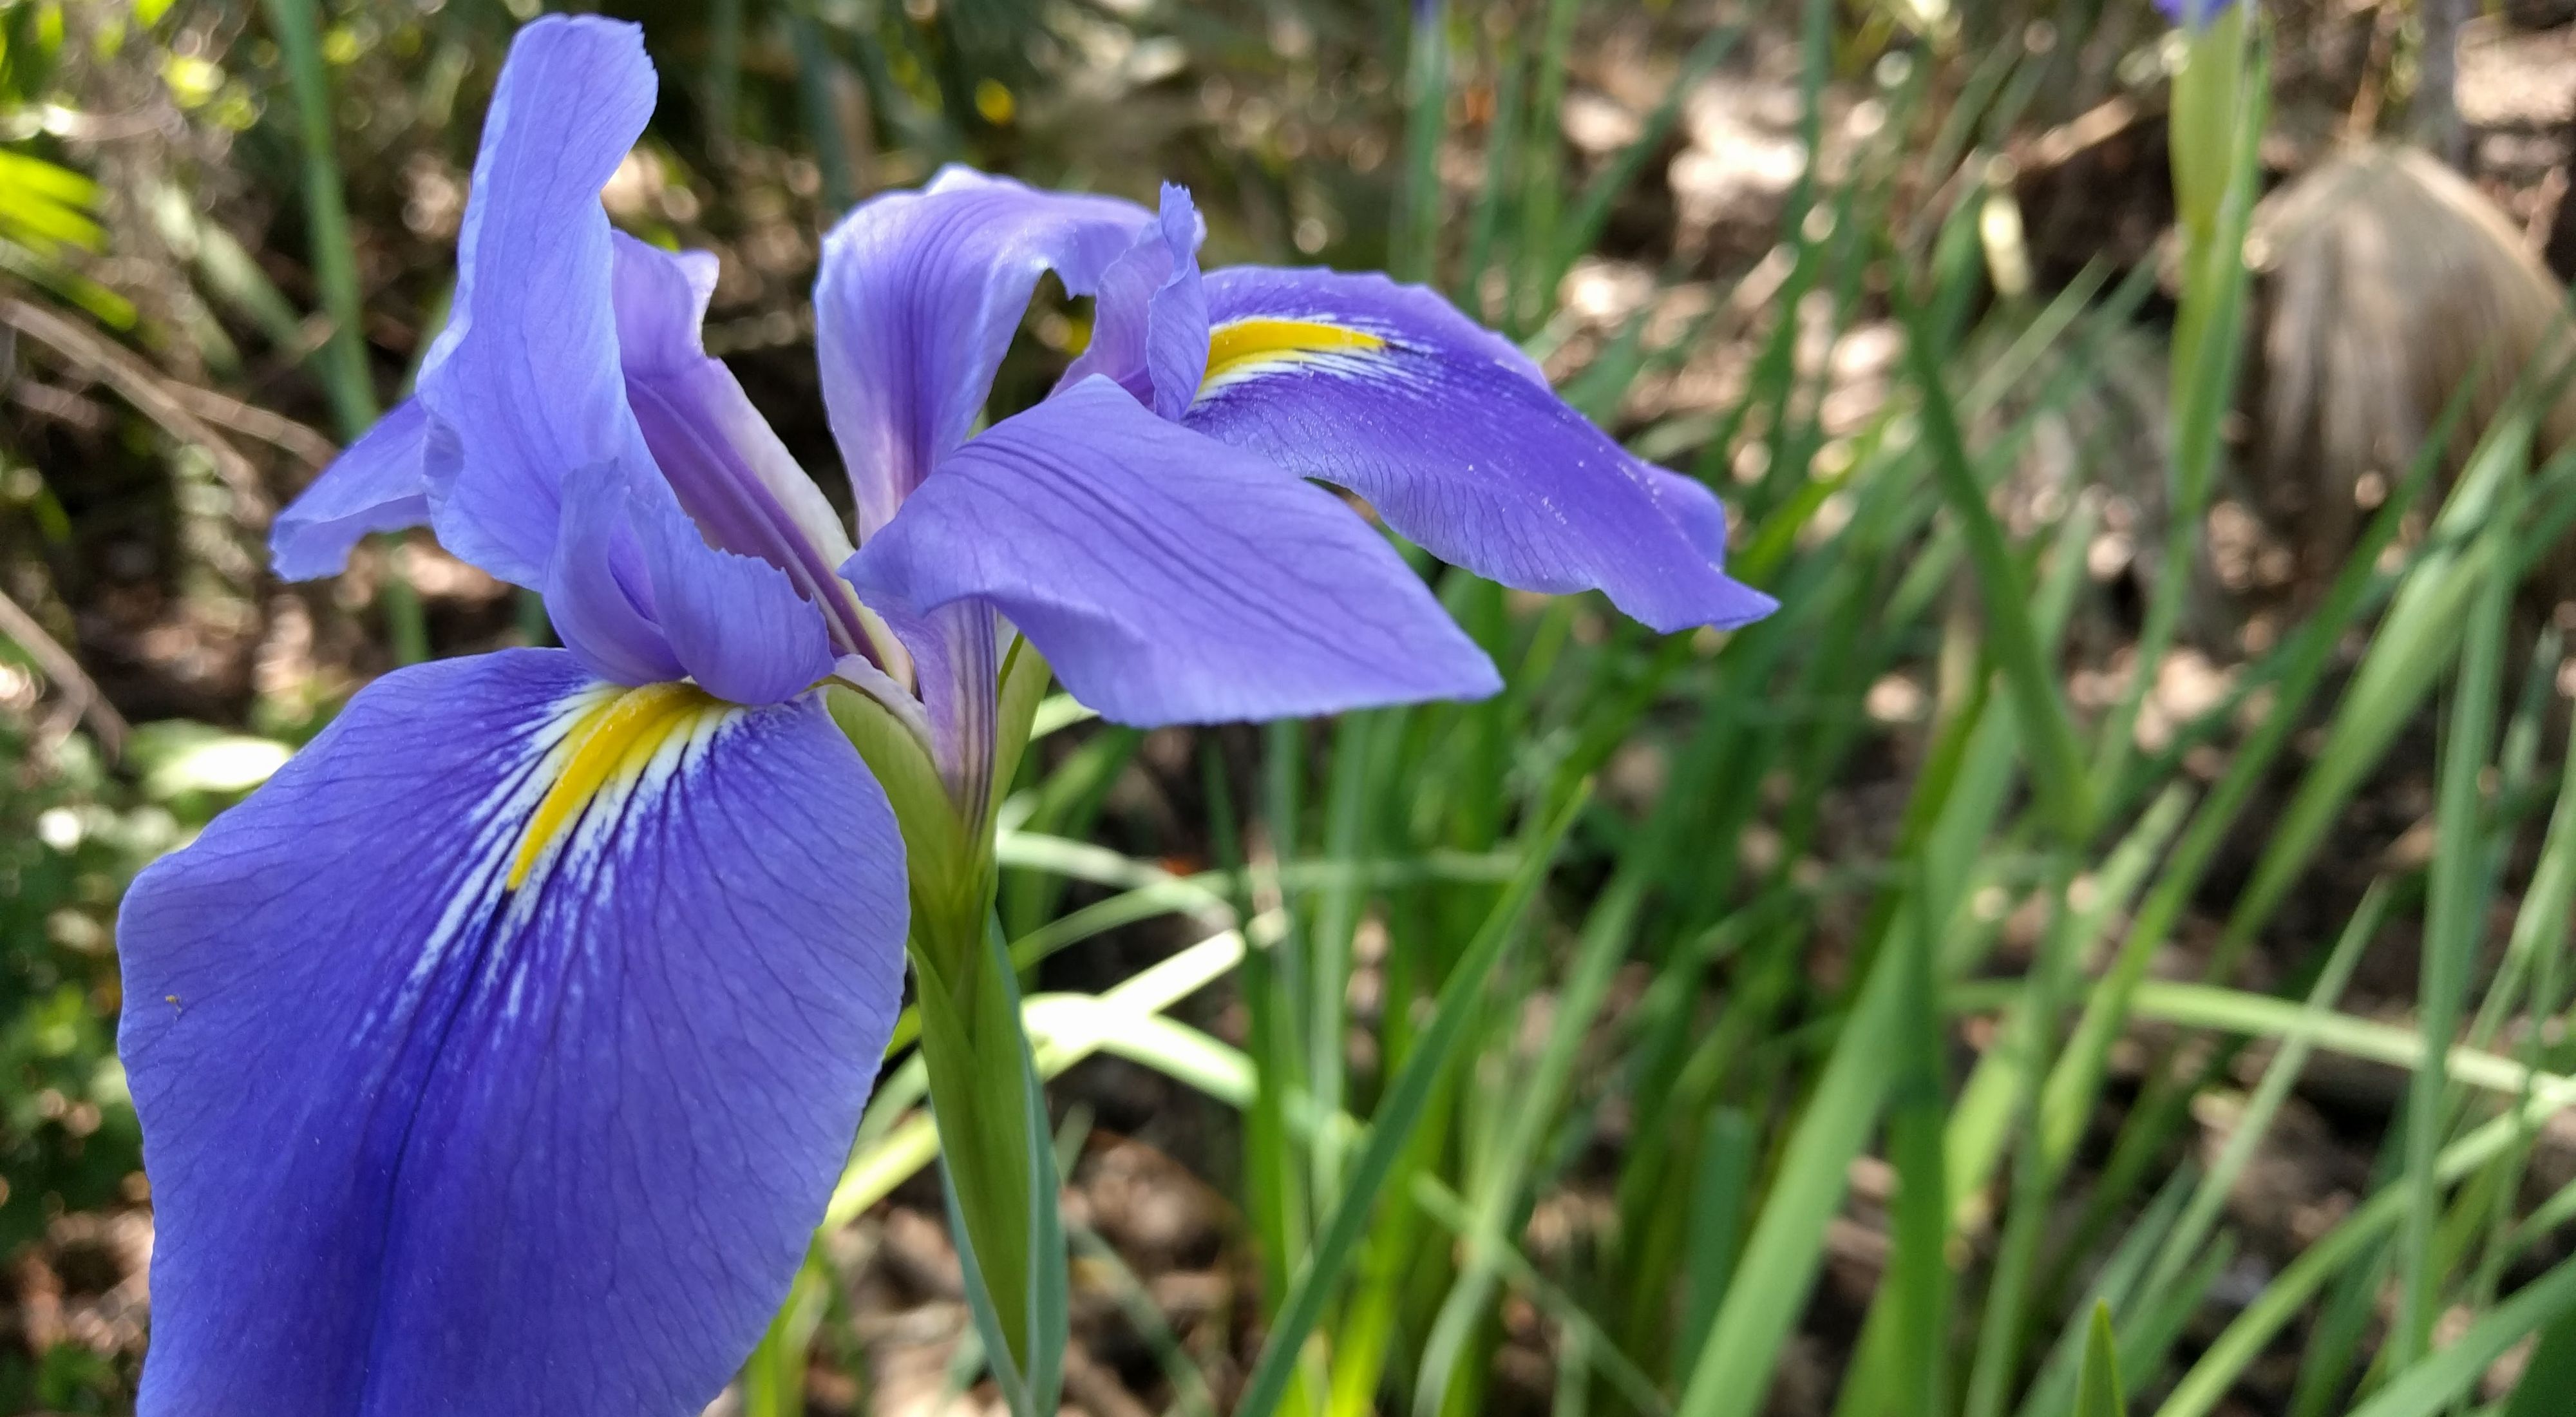 A blue-purple flower with large petals emerges from a long, thick stem.